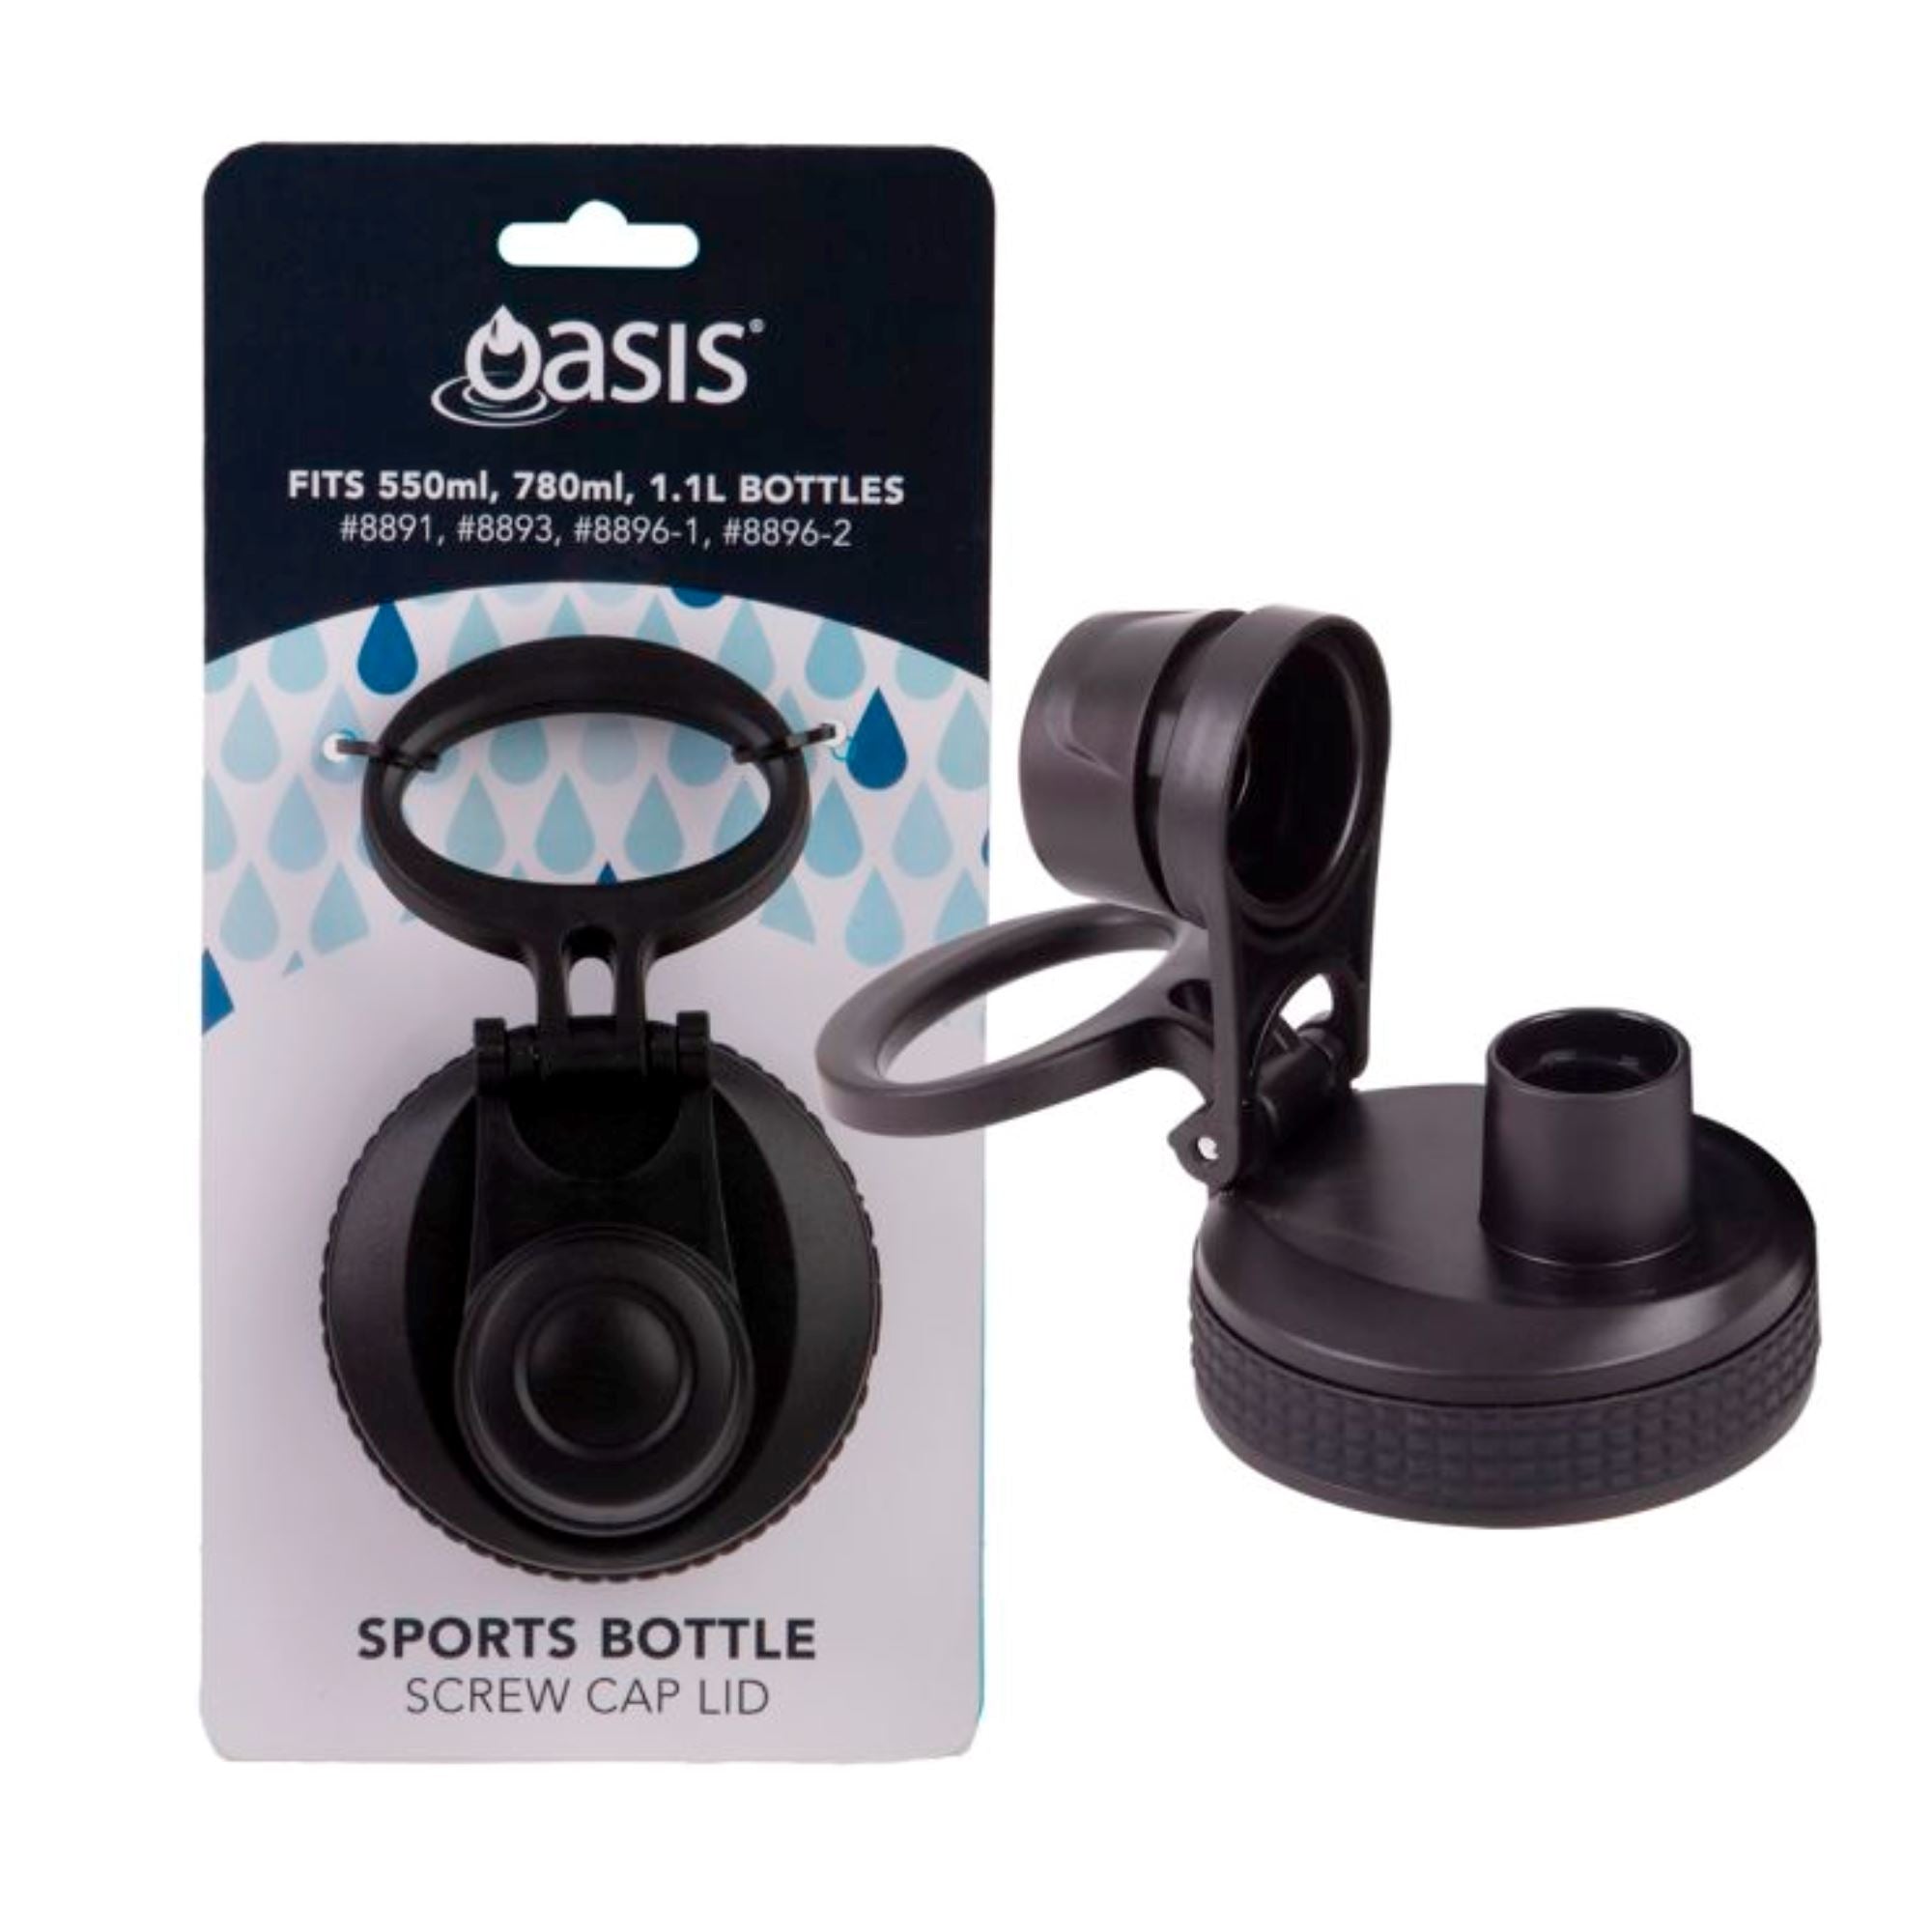 Oasis Insulated Water Bottle Screw Cap Replacement Lid - Black Insulated Oasis 